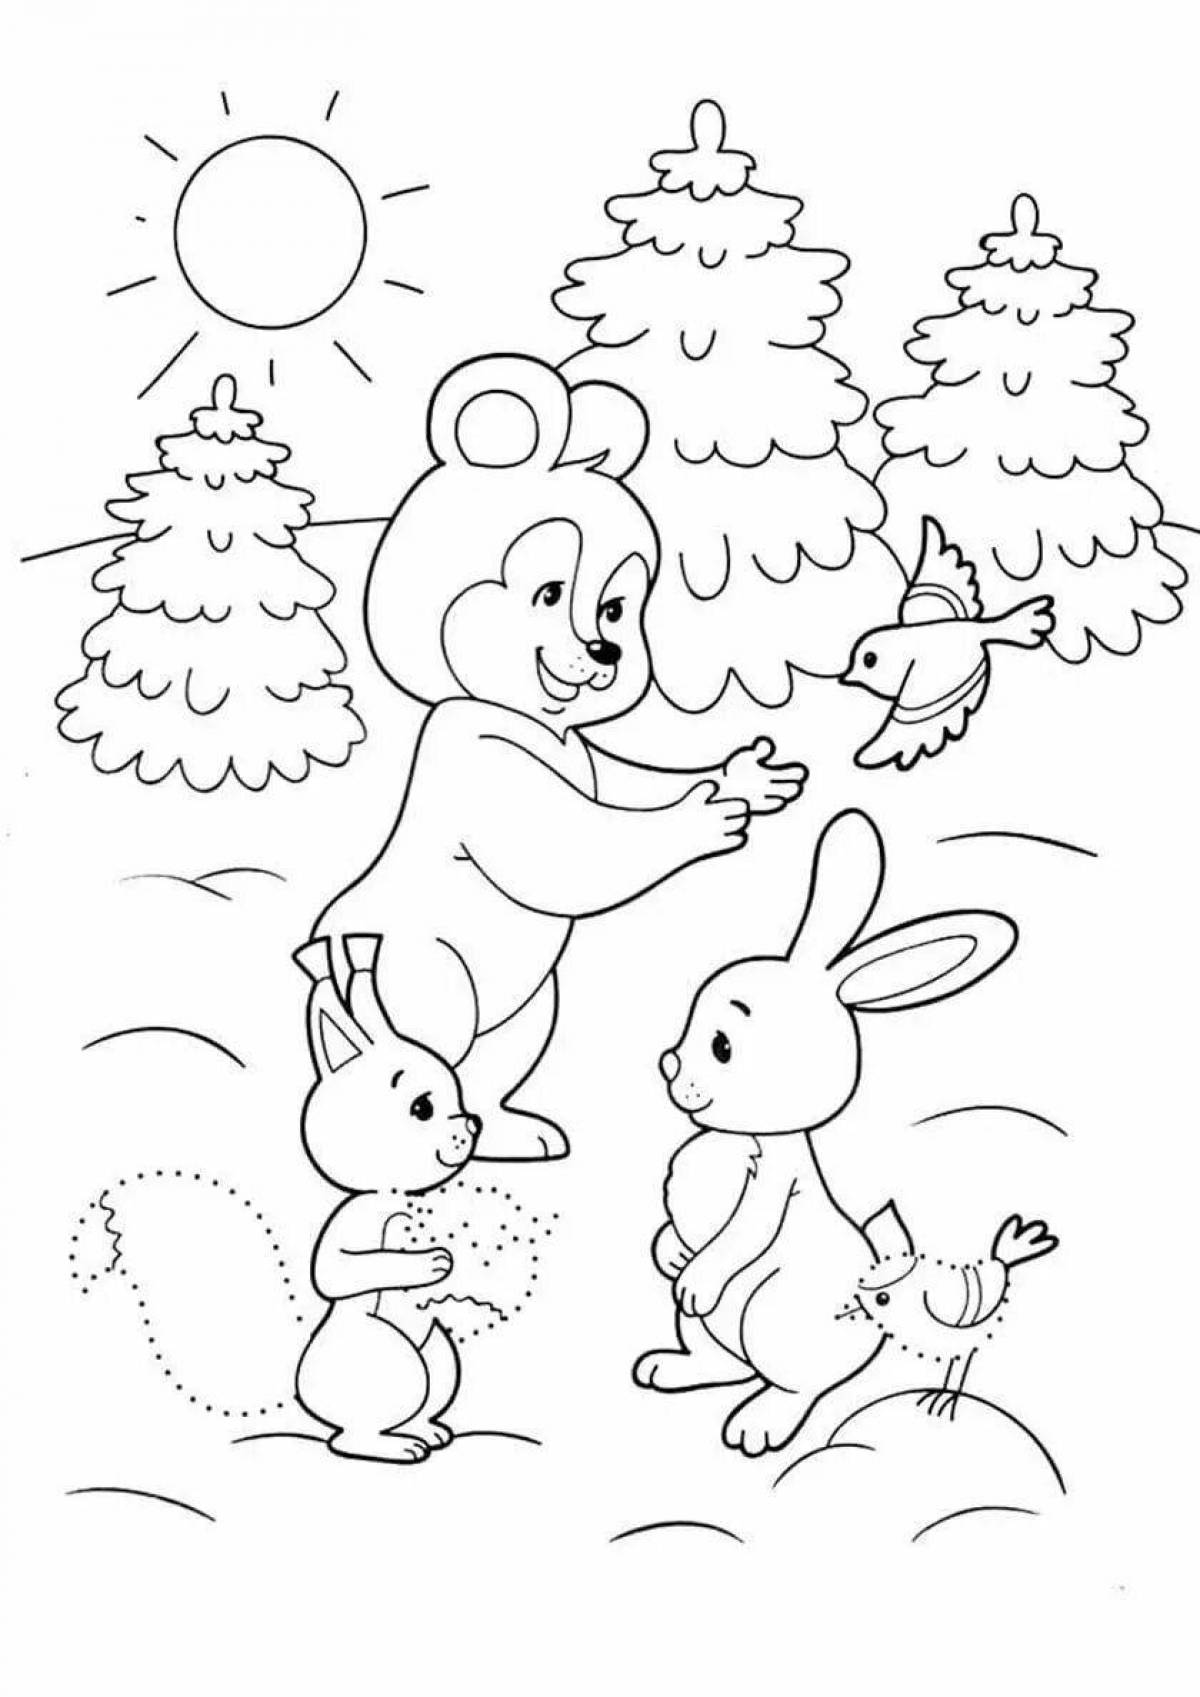 Luminous winter coloring book for children 4 years old